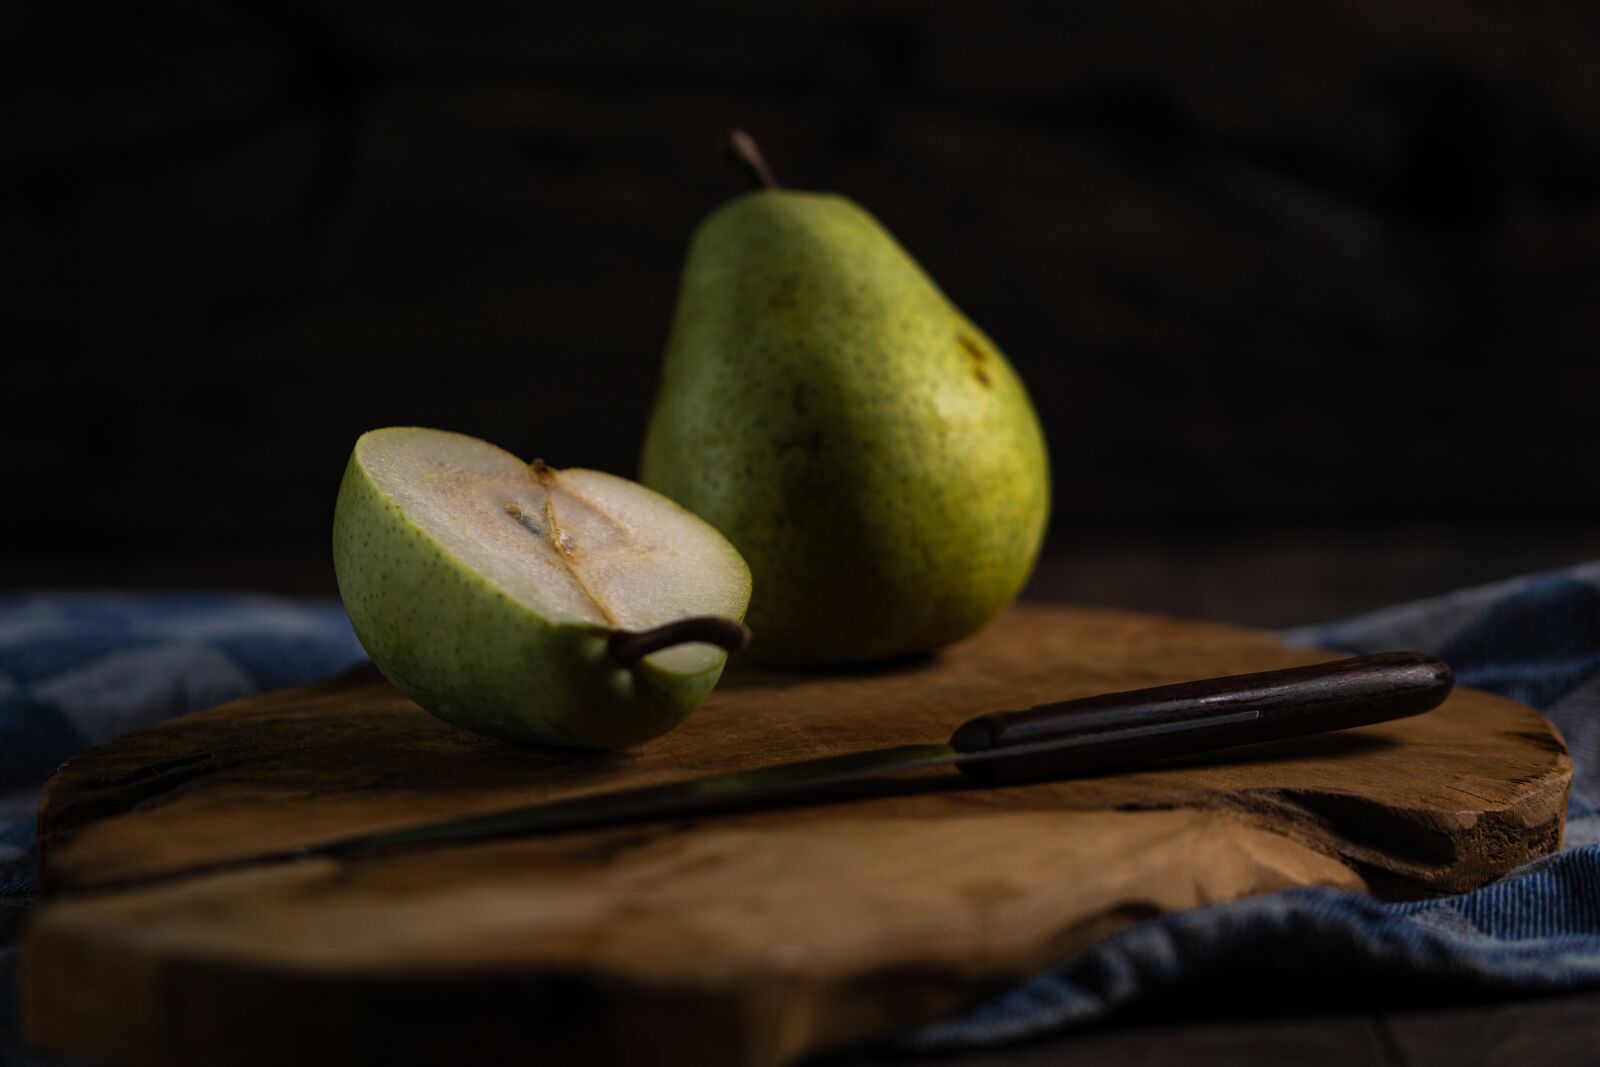 105mm F2.8 sample photo. Pears, fruit, slice photography